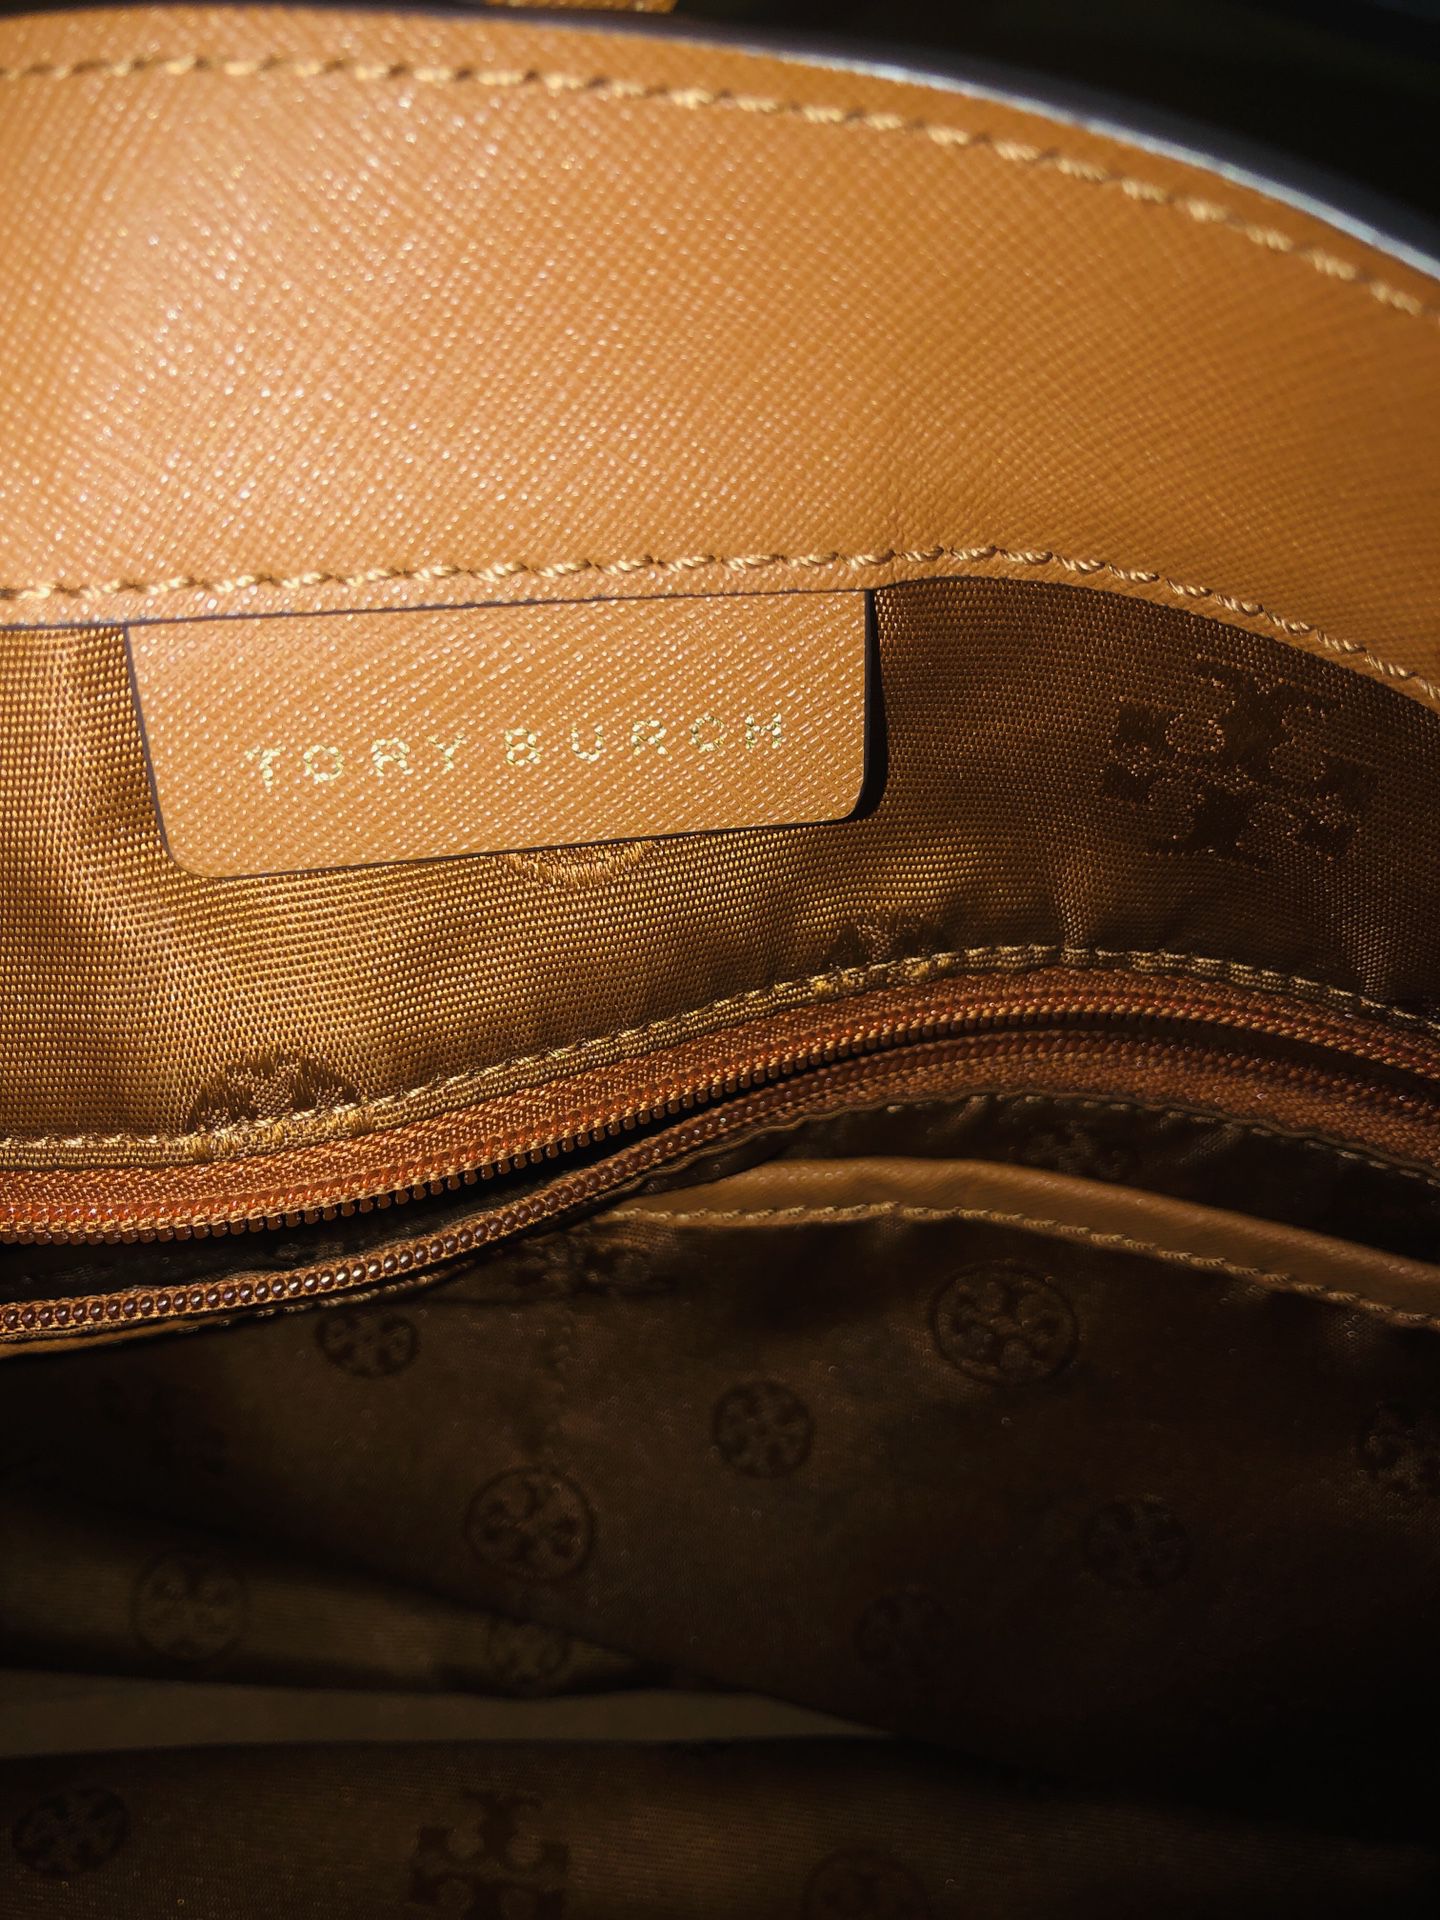 Tory Burch York Small Buckle Tote for Sale in Chantilly, VA - OfferUp